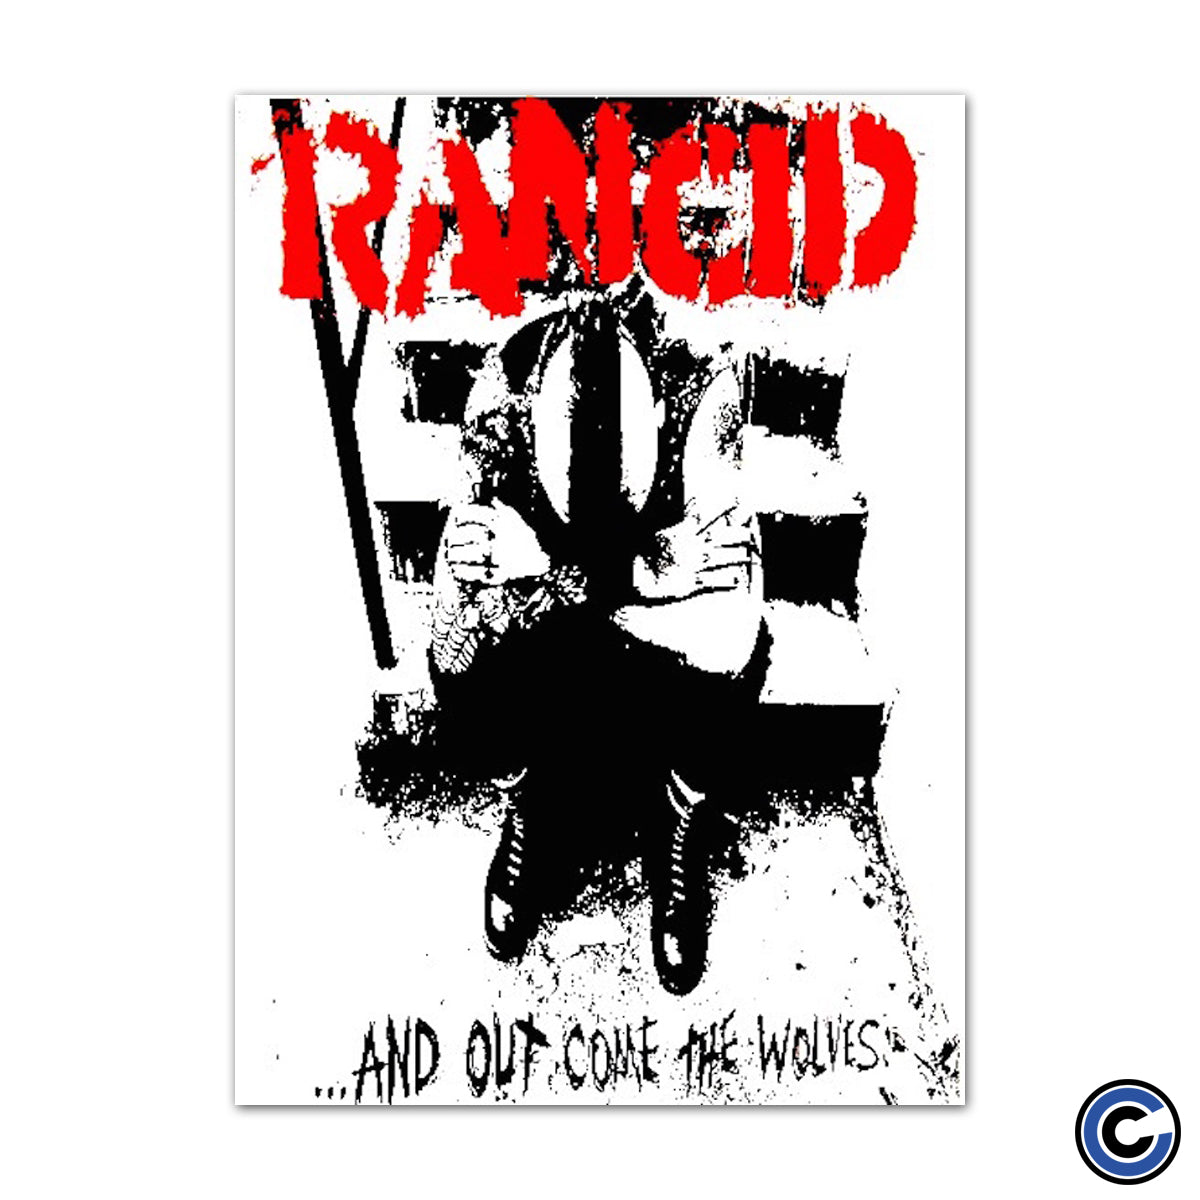 Rancid "And Out Came The Wolves" Poster